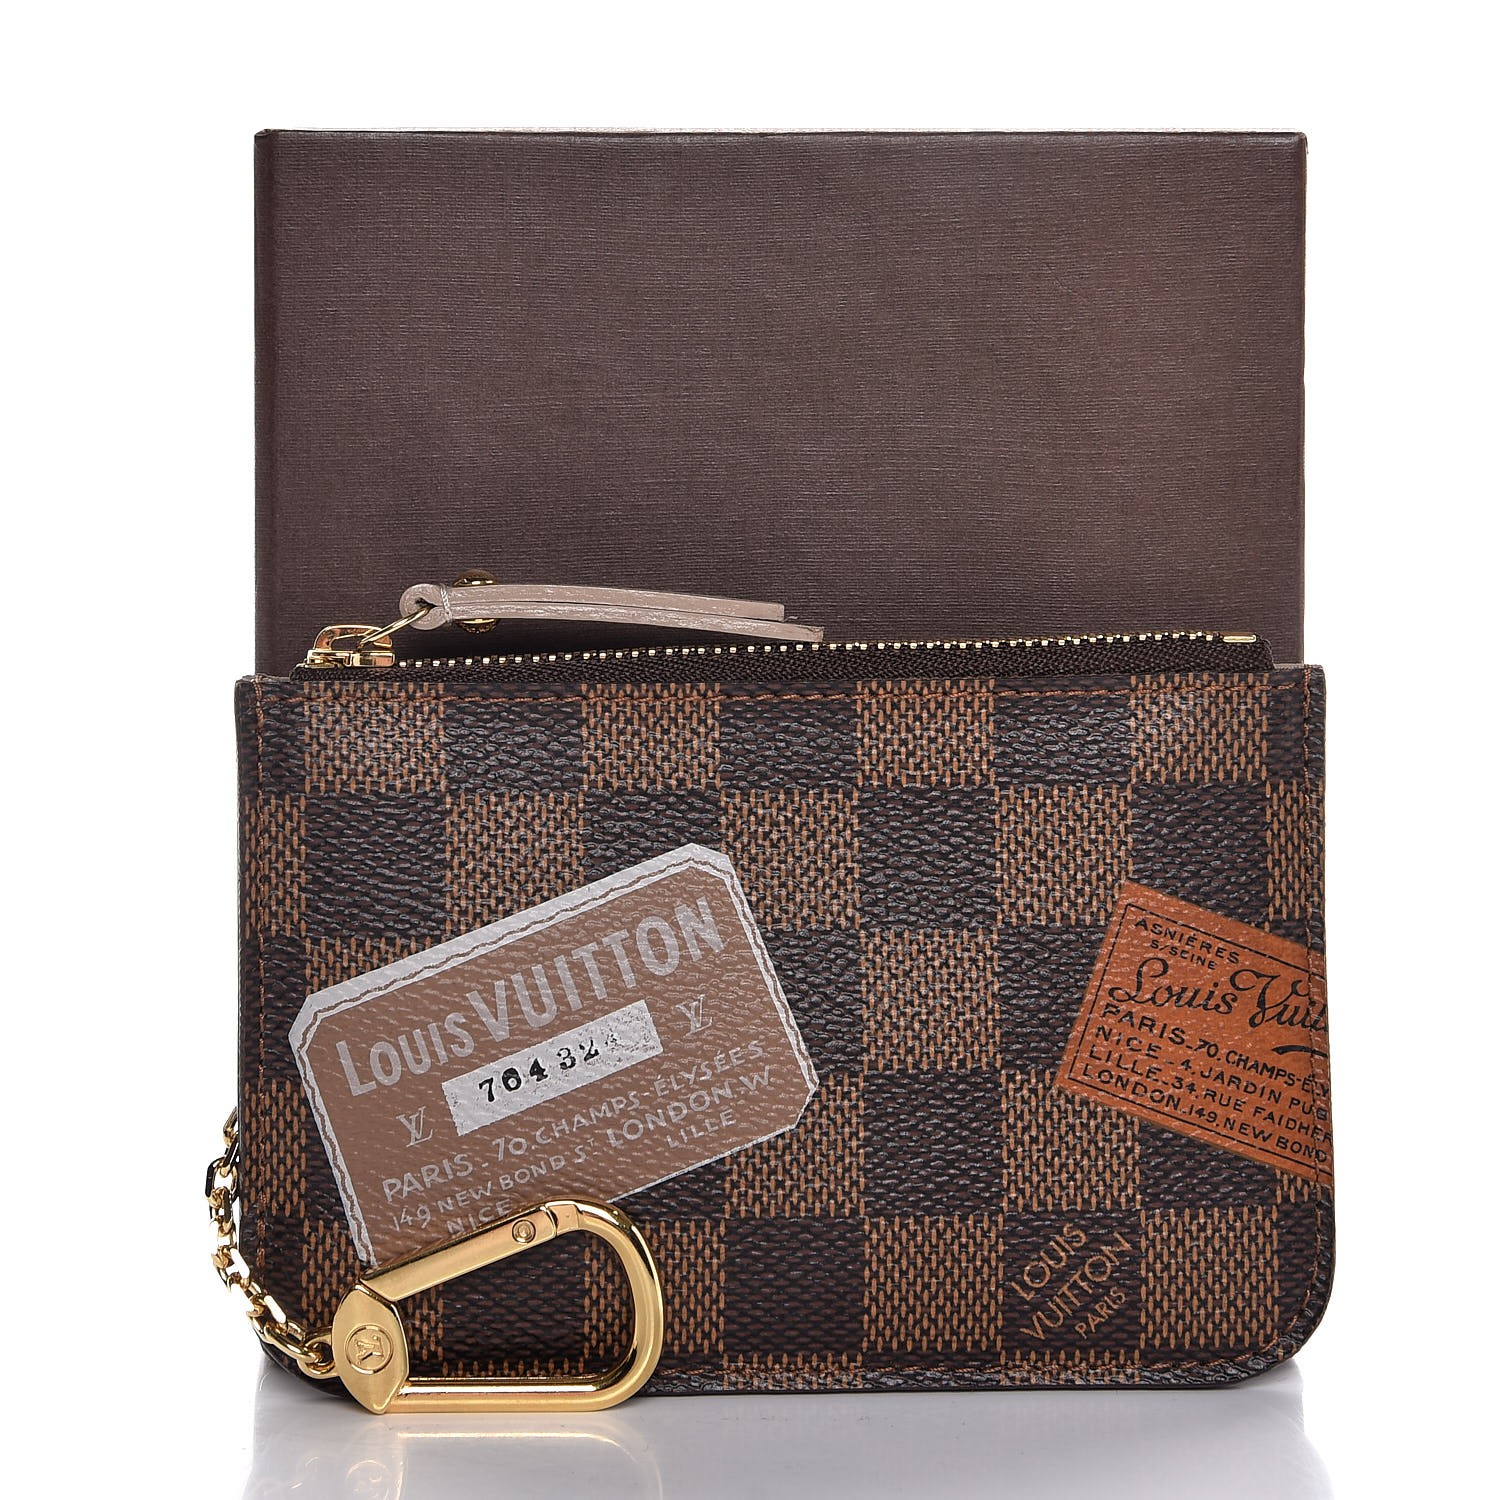 LOUIS VUITTON Damier Ebene Trunks and Bags Key Cles 320916